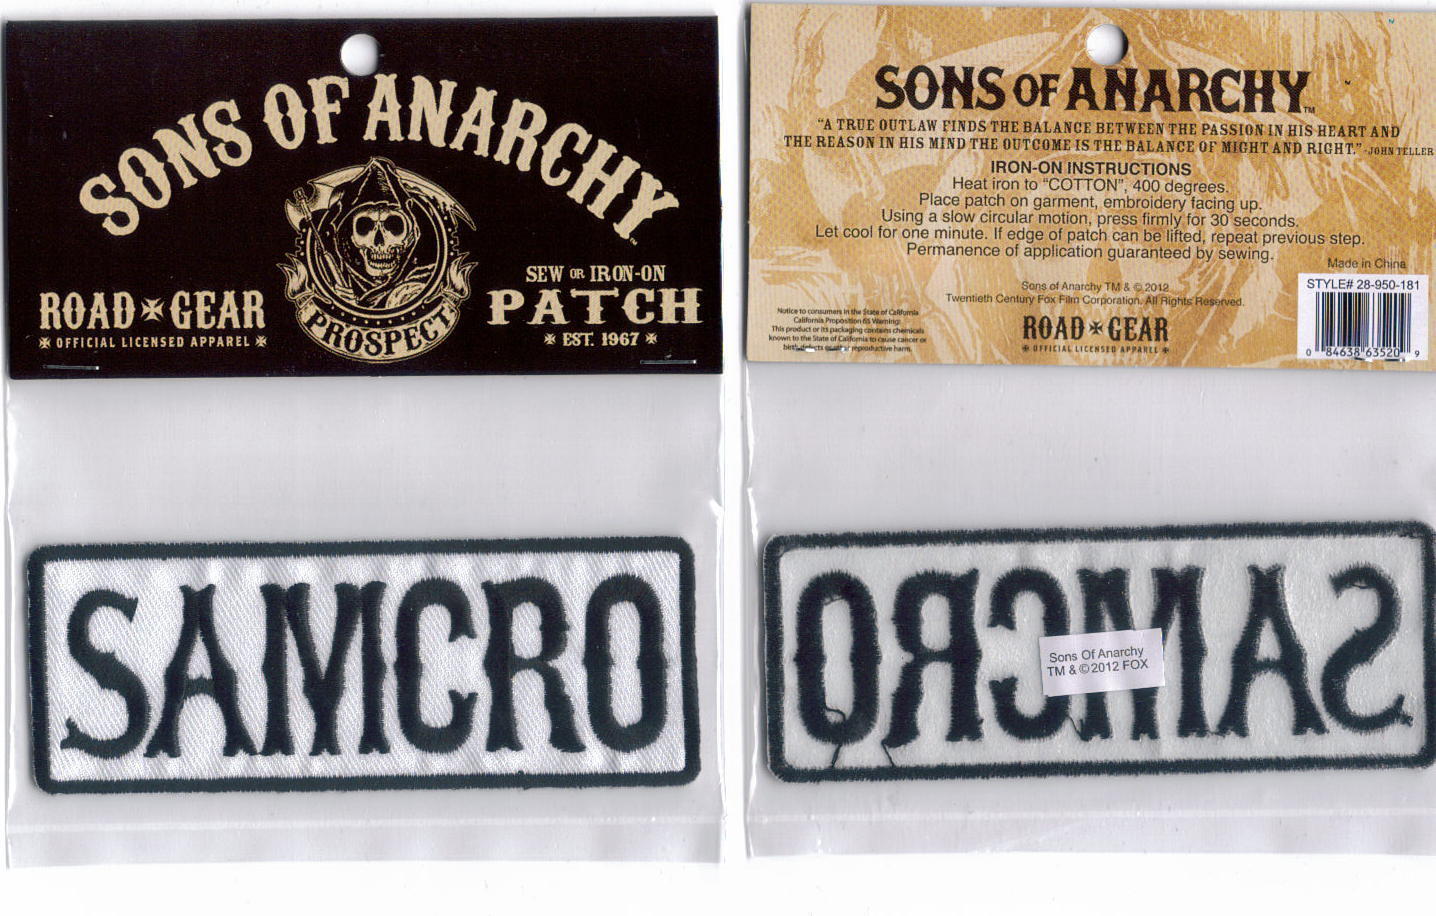 SONS OF ANARCHY SAMCRO EMBROIDERED PATCH NEW 